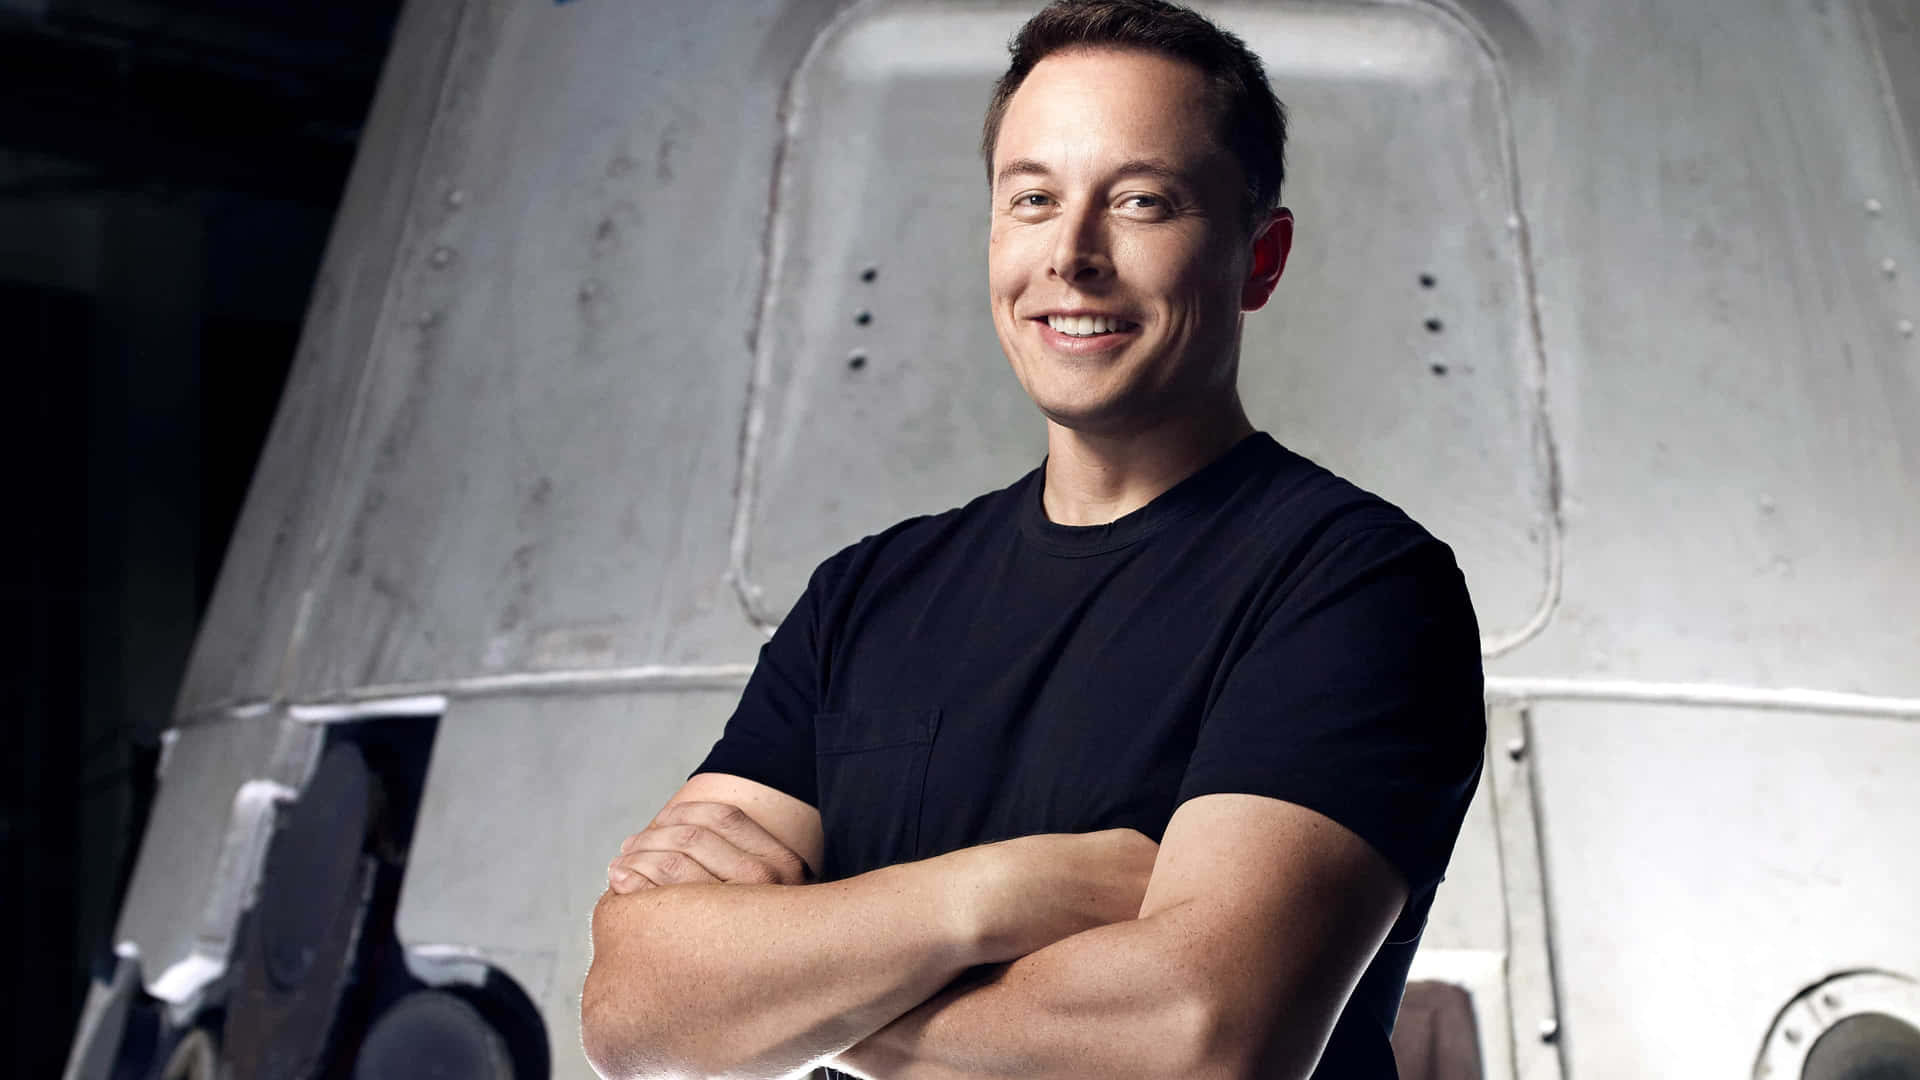 Elon Musk, CEO and Founder of SpaceX